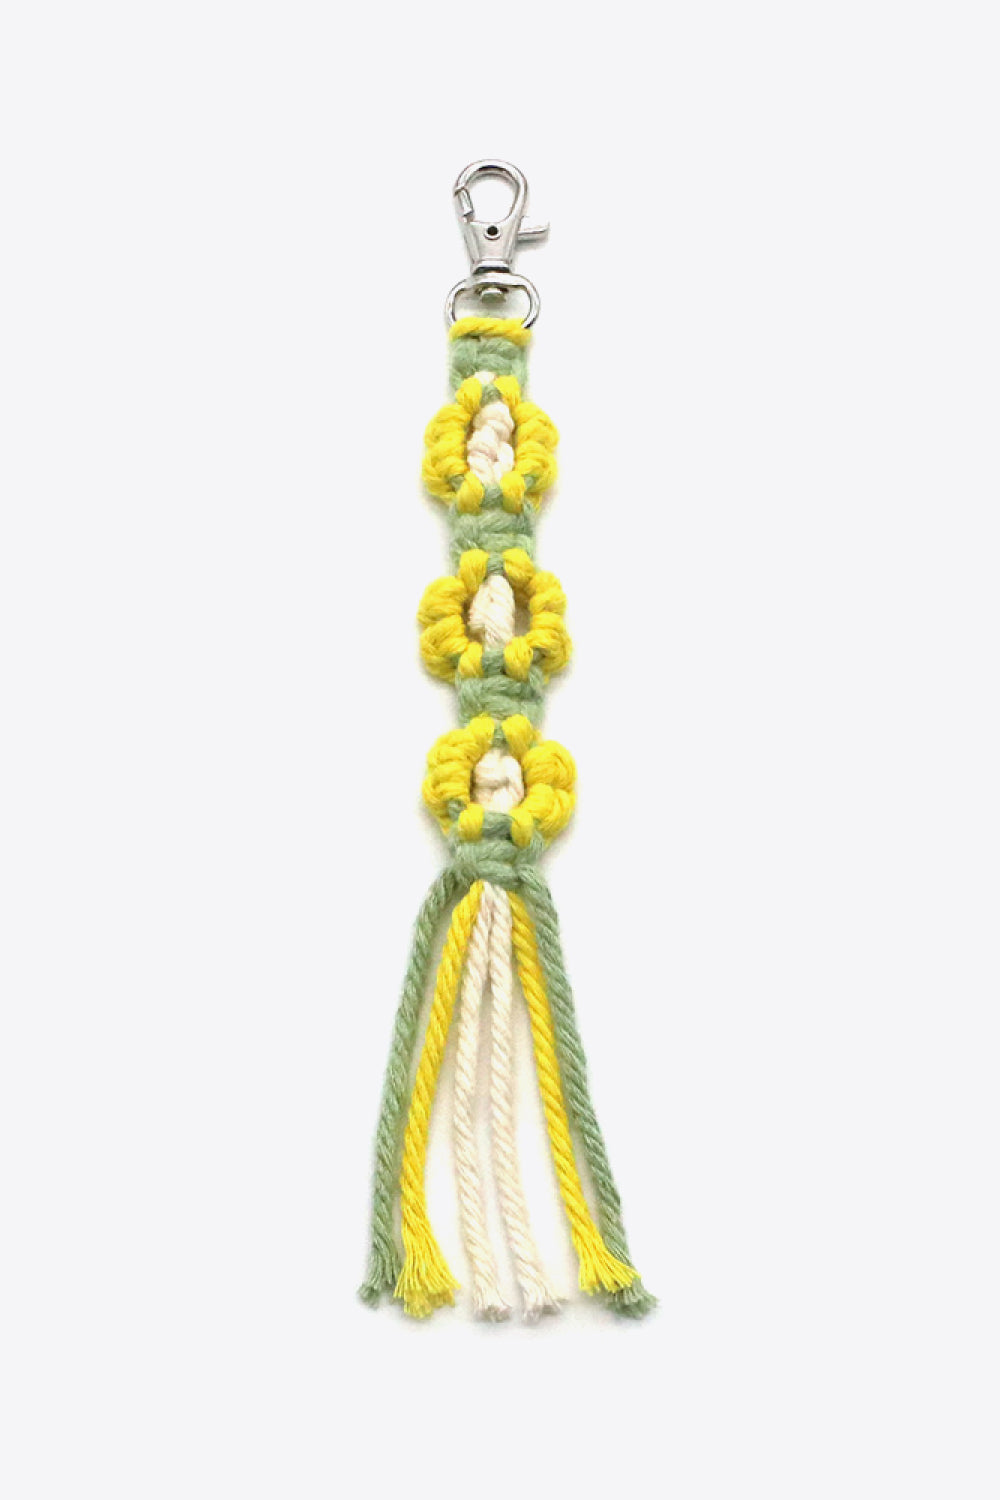 Trendsi Cupid Beauty Supplies Banana Yellow / One Size Keychains 4-Pack Hand-Woven Flower Keychain, Color Varies